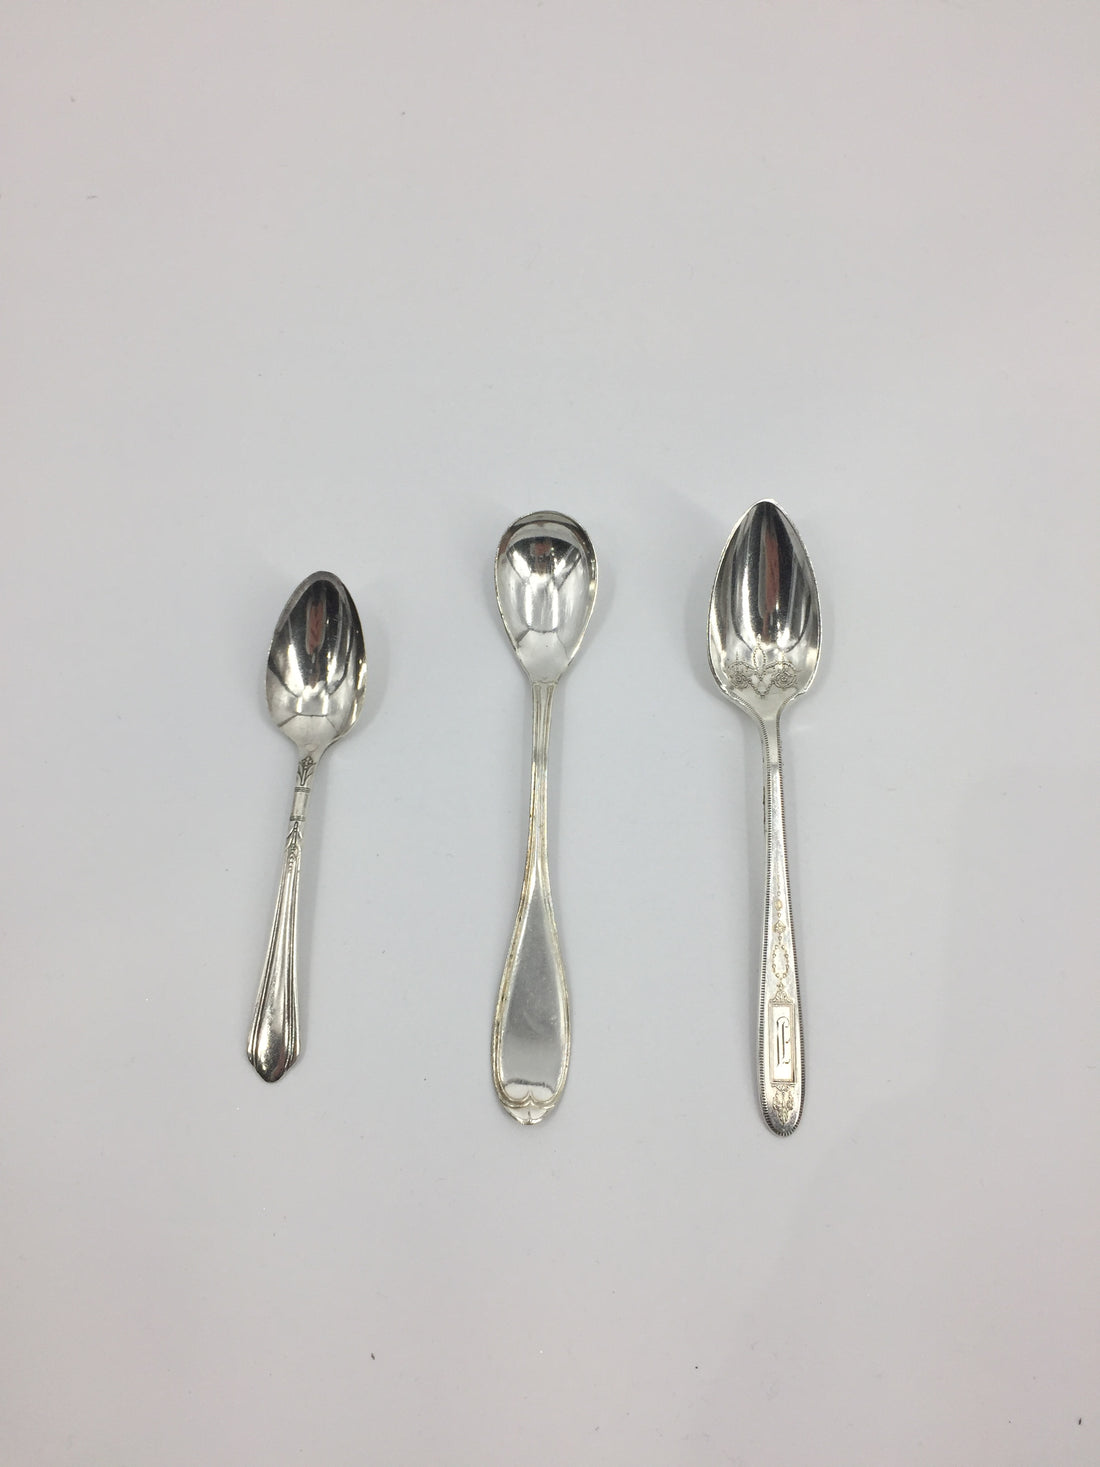 Three Demitasse Spoon open stock by Hester &amp; Cook on a white surface.